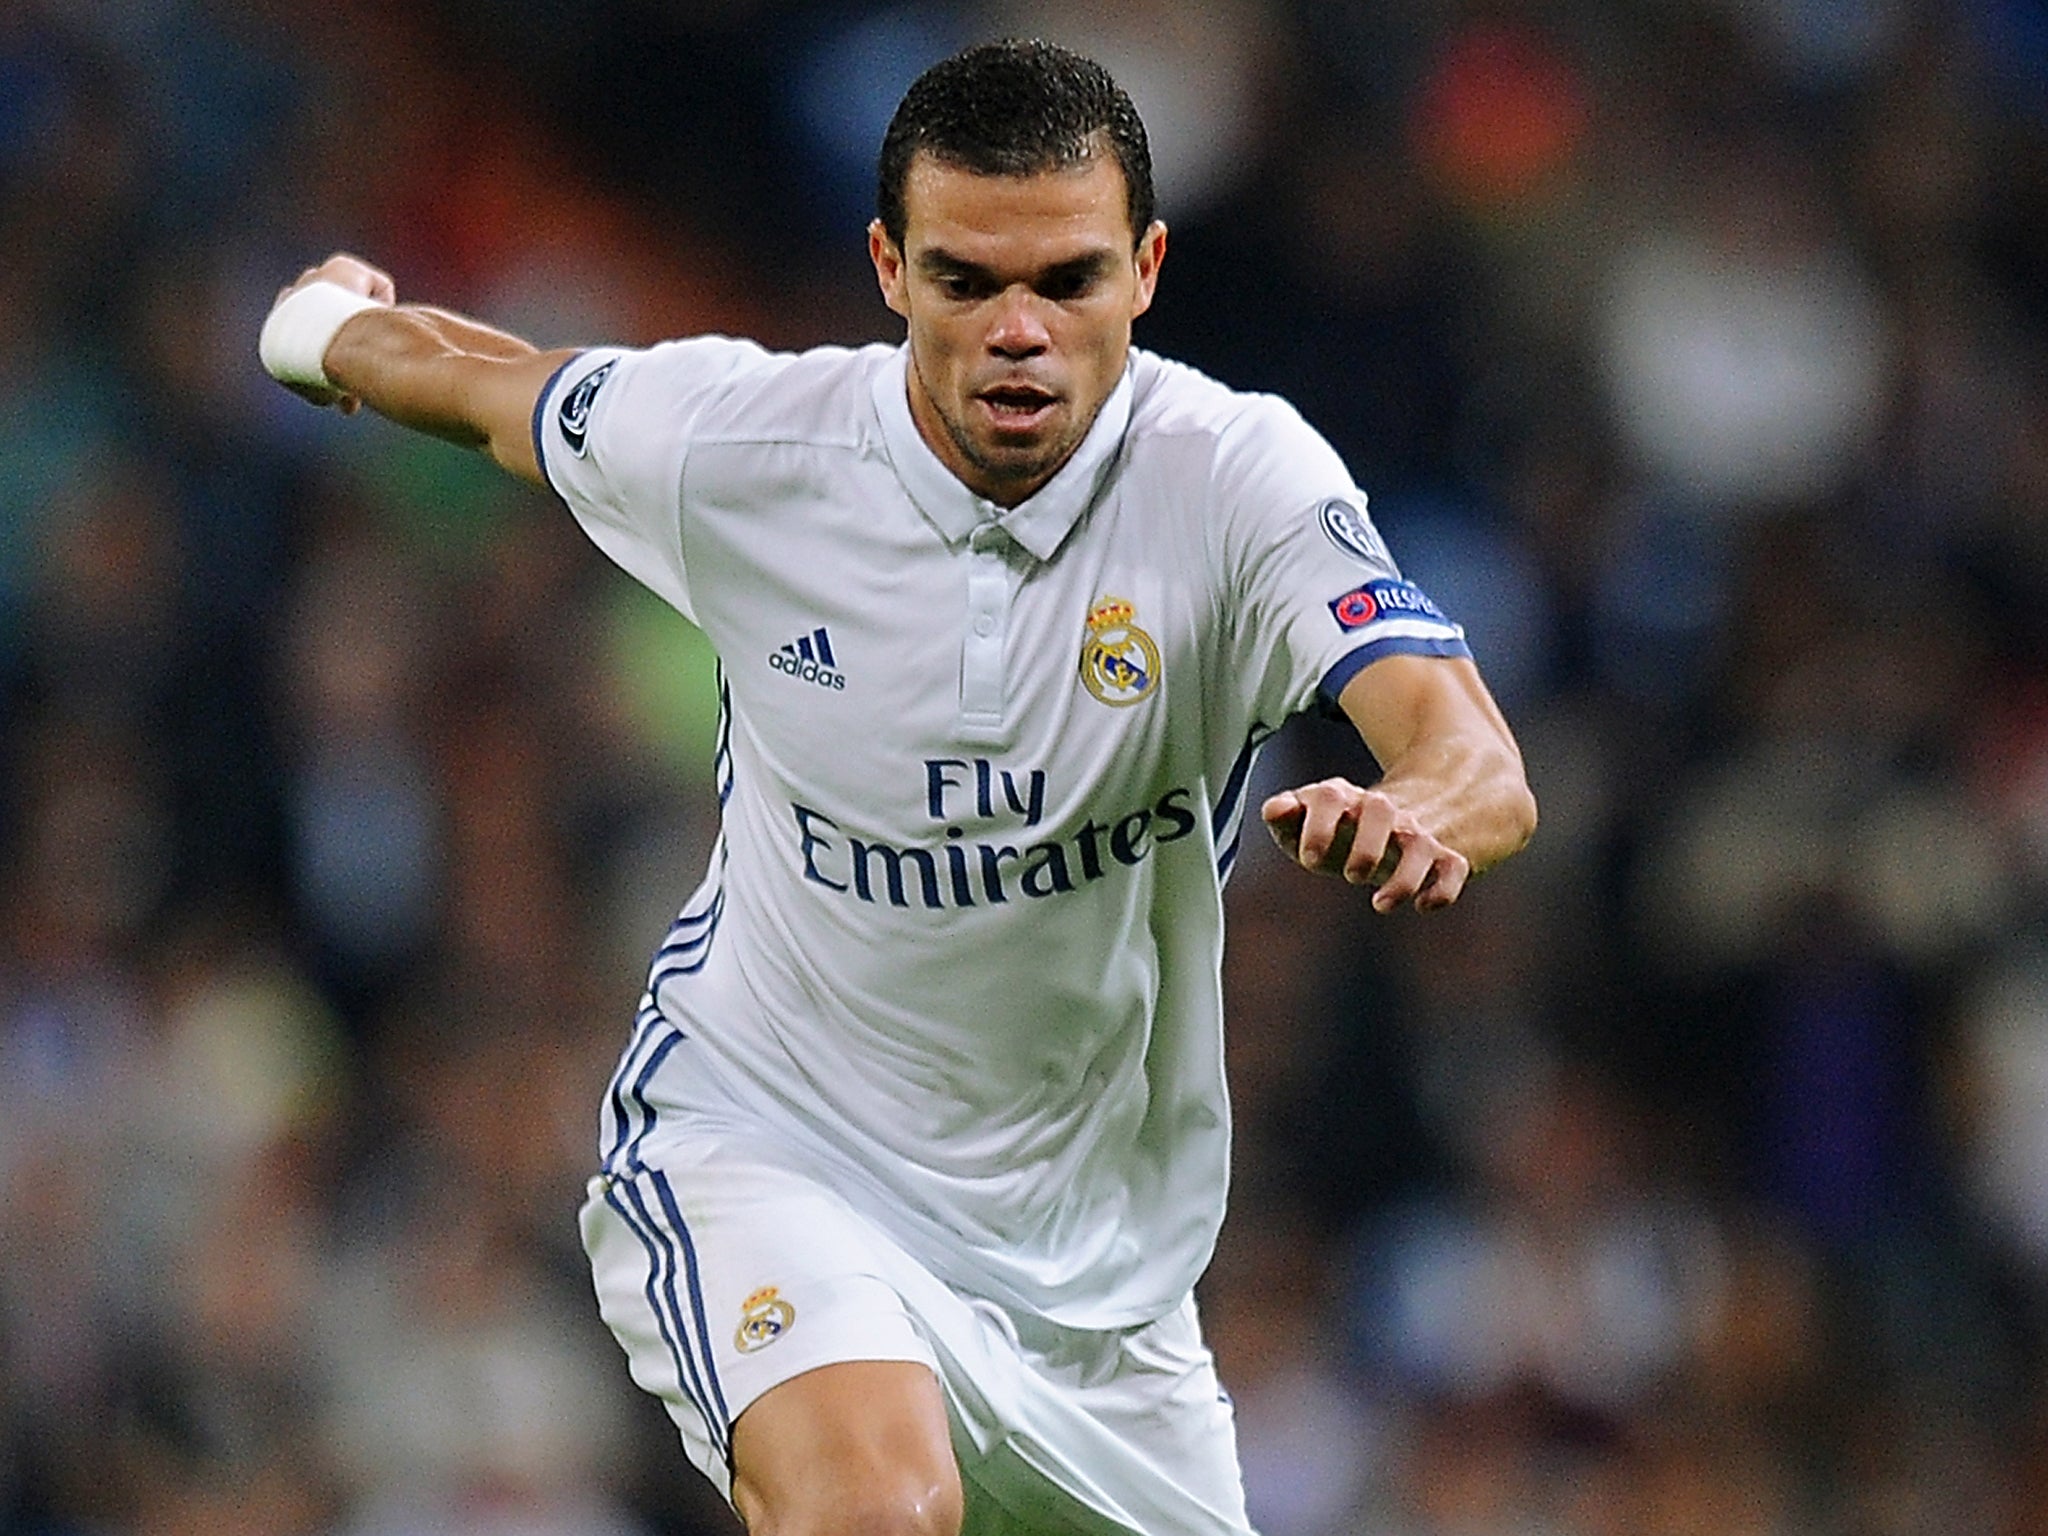 Pepe was named in Fifa's World XI last year